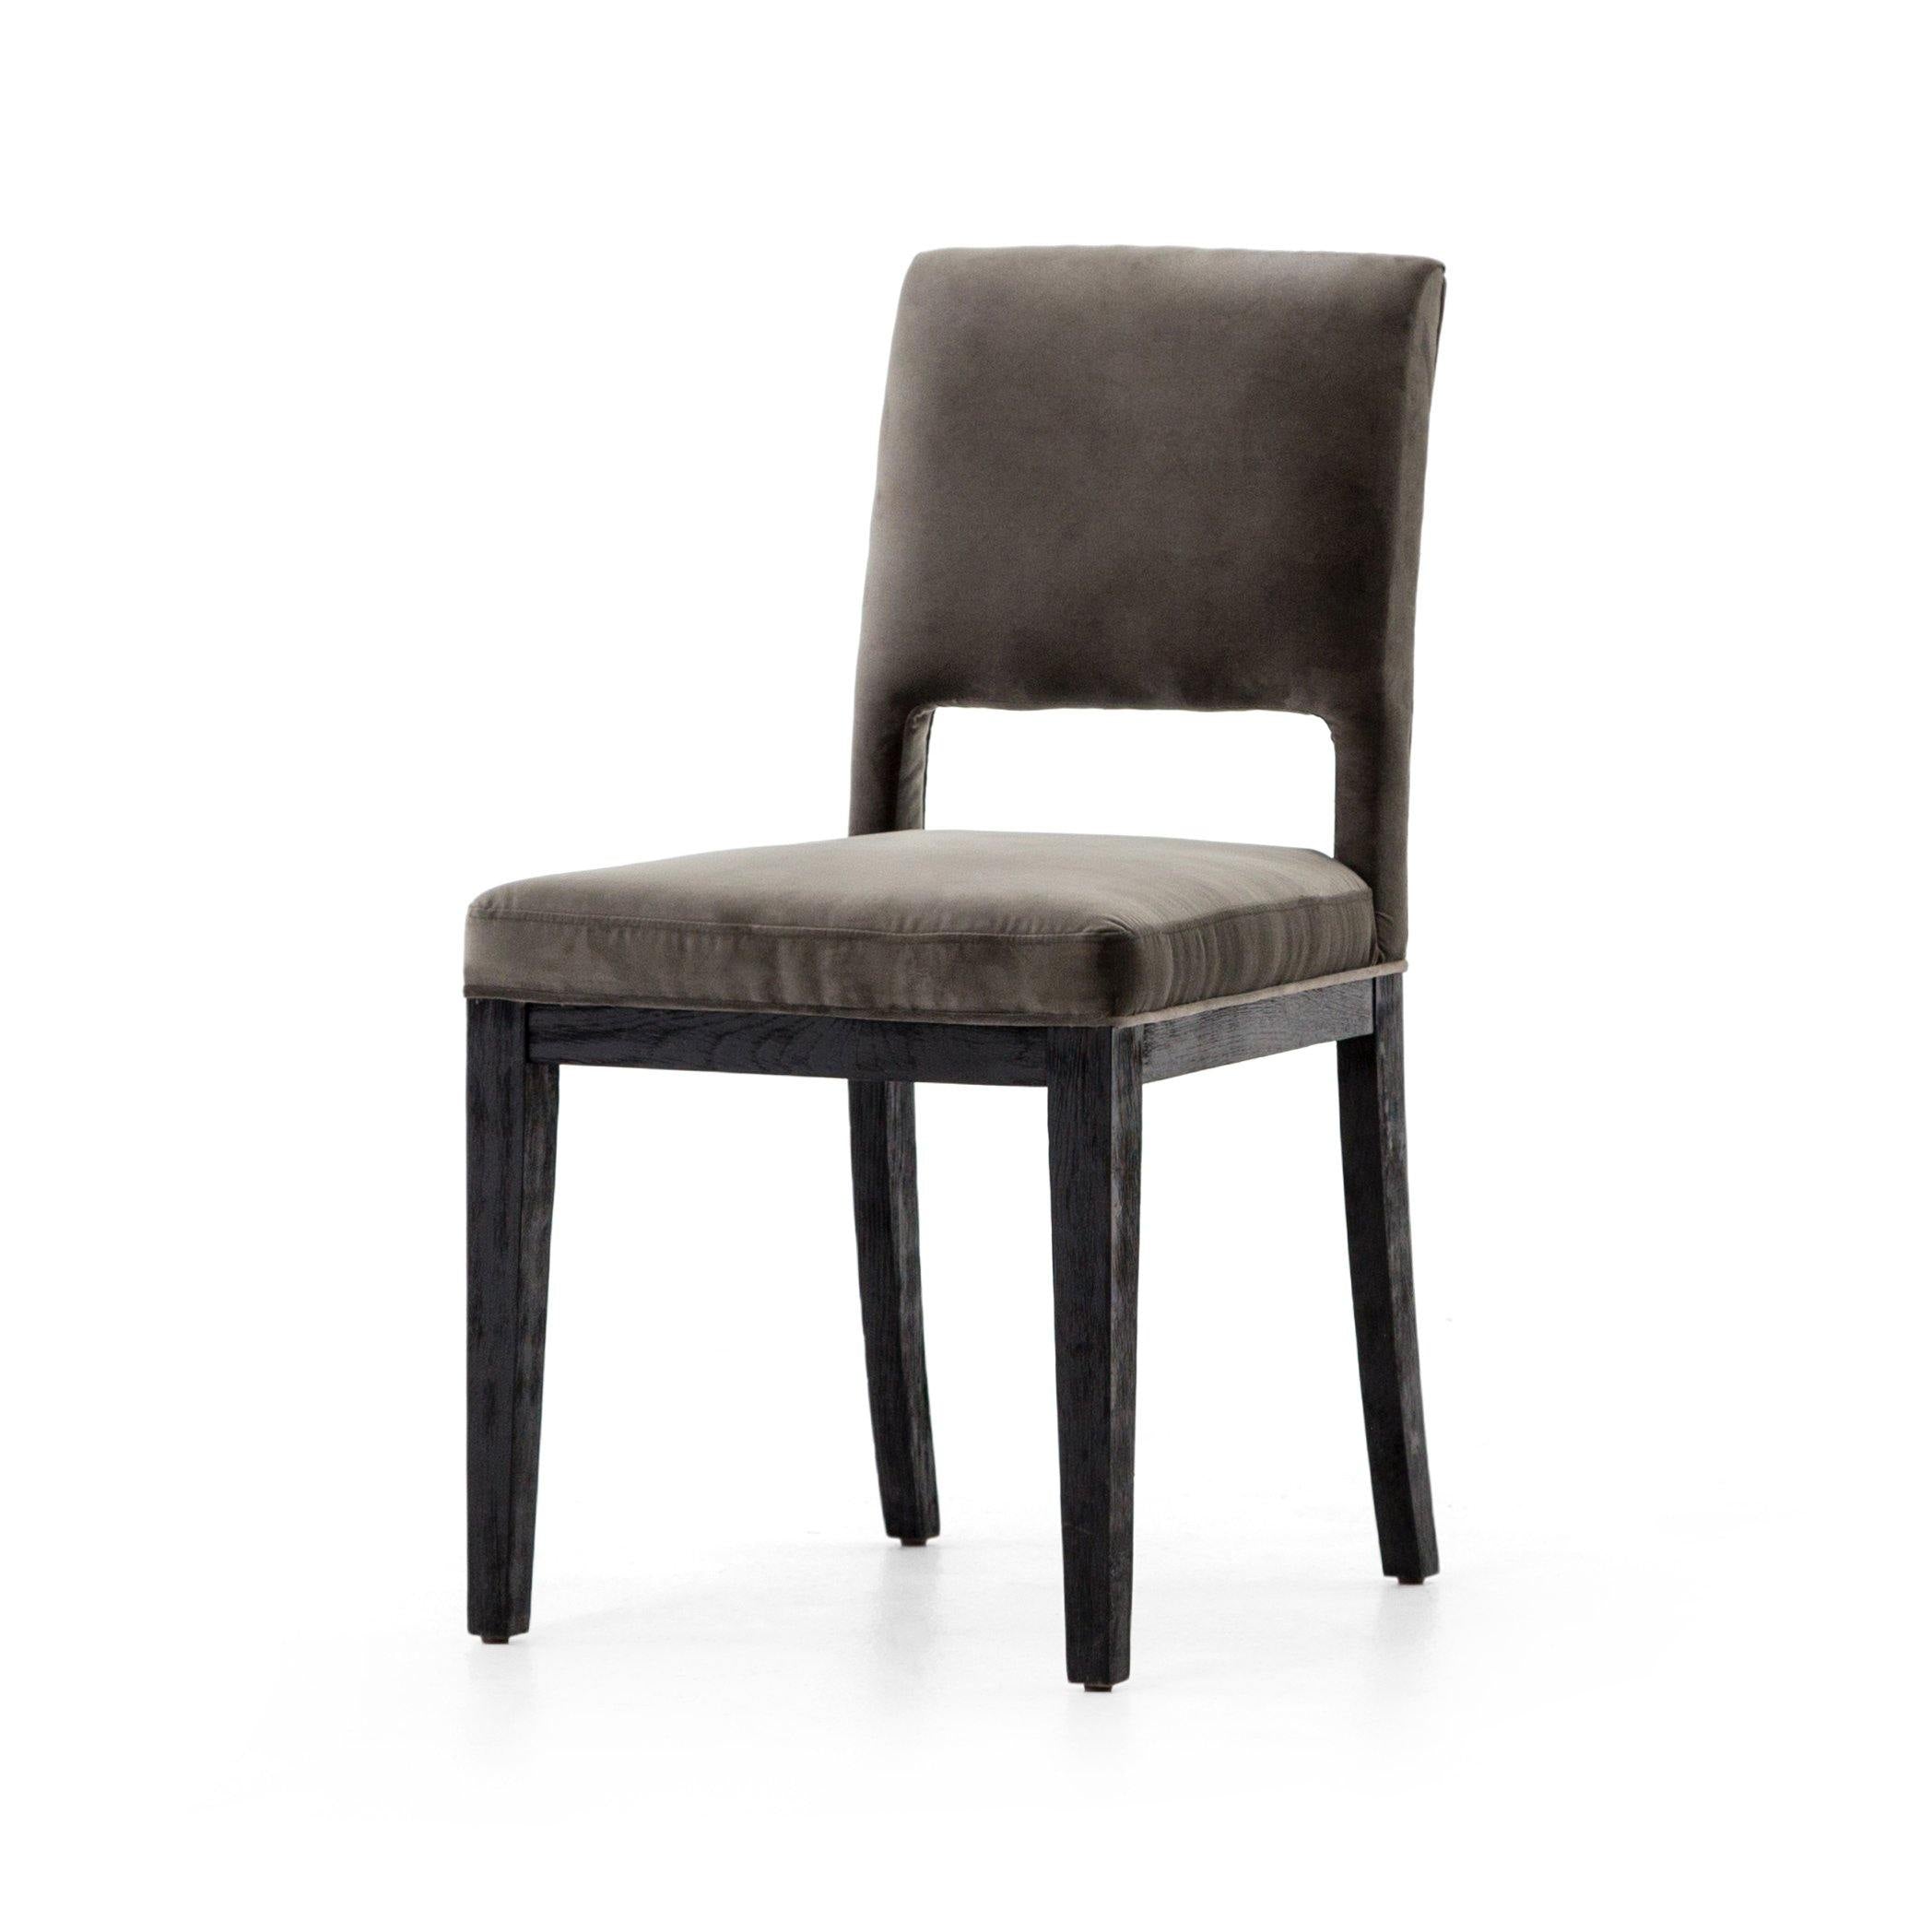 SARA DINING CHAIR - Reimagine Designs - Dining Chair, new